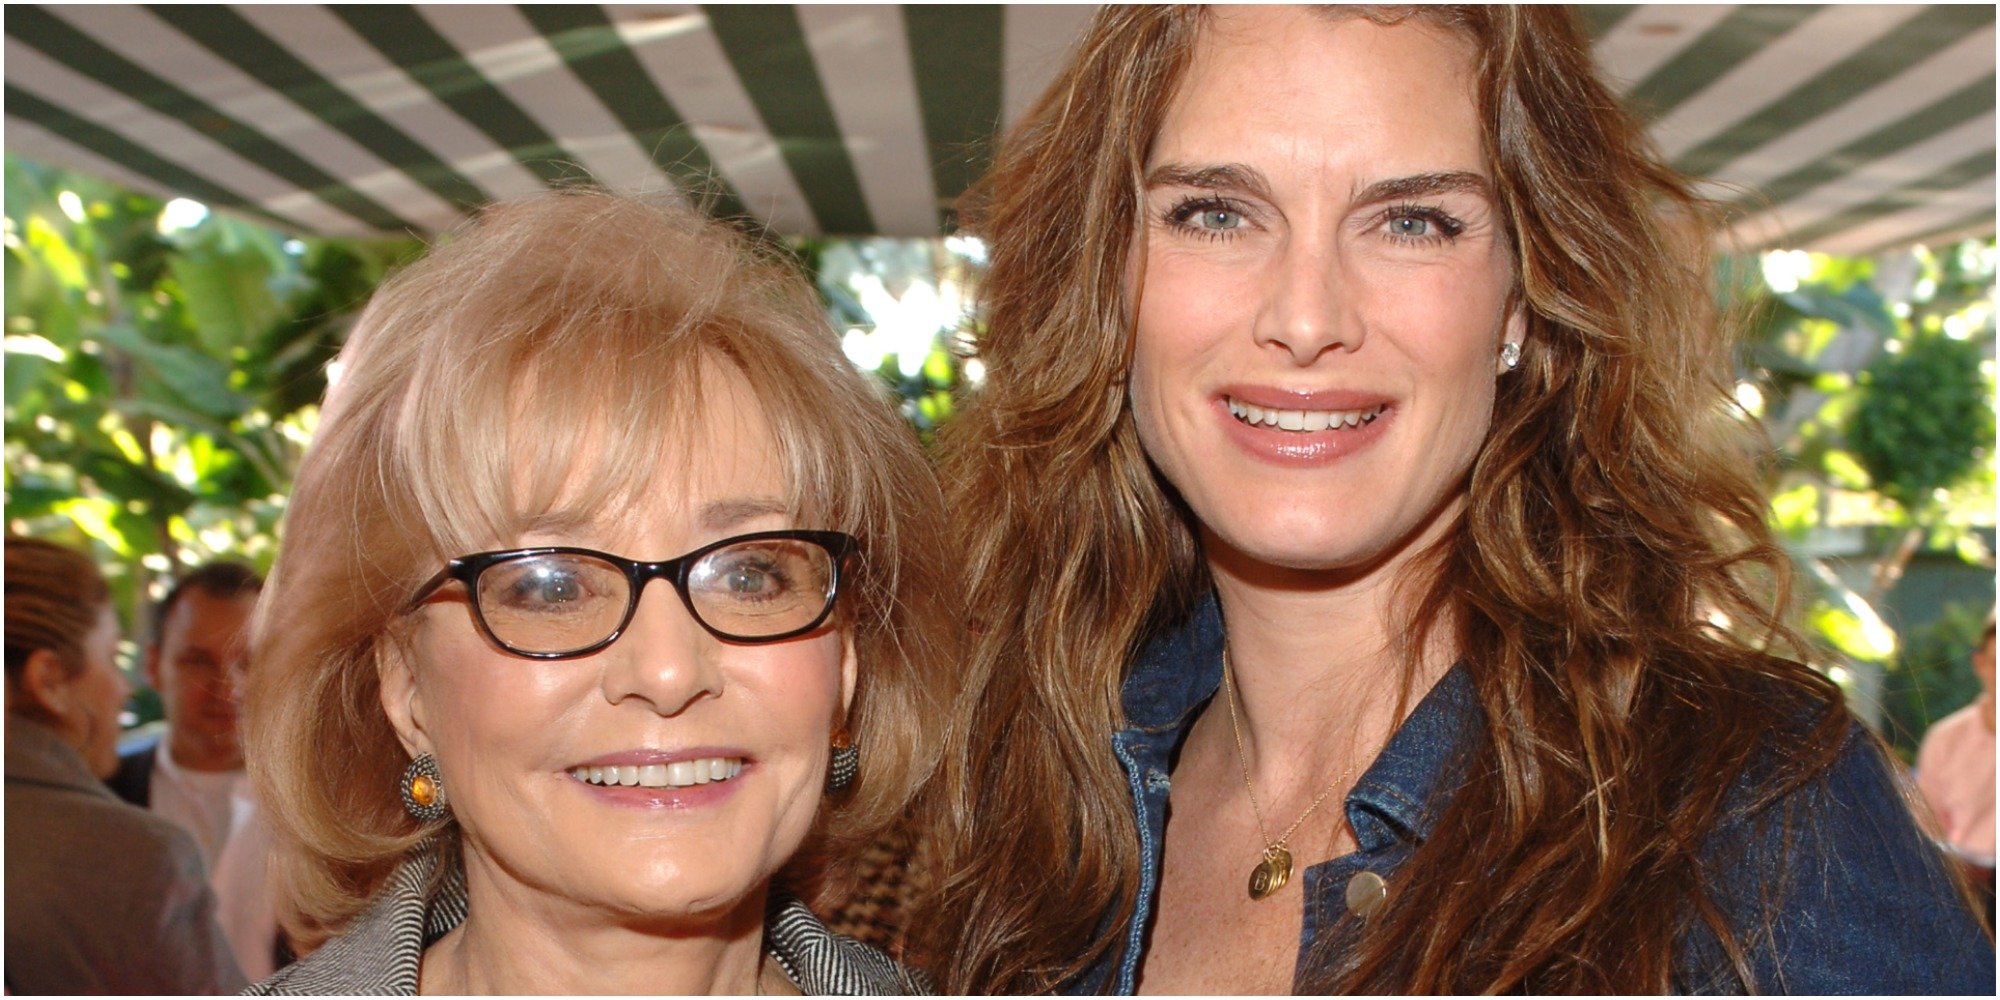 Barbara Walters and Brooke Shields at an industry event.